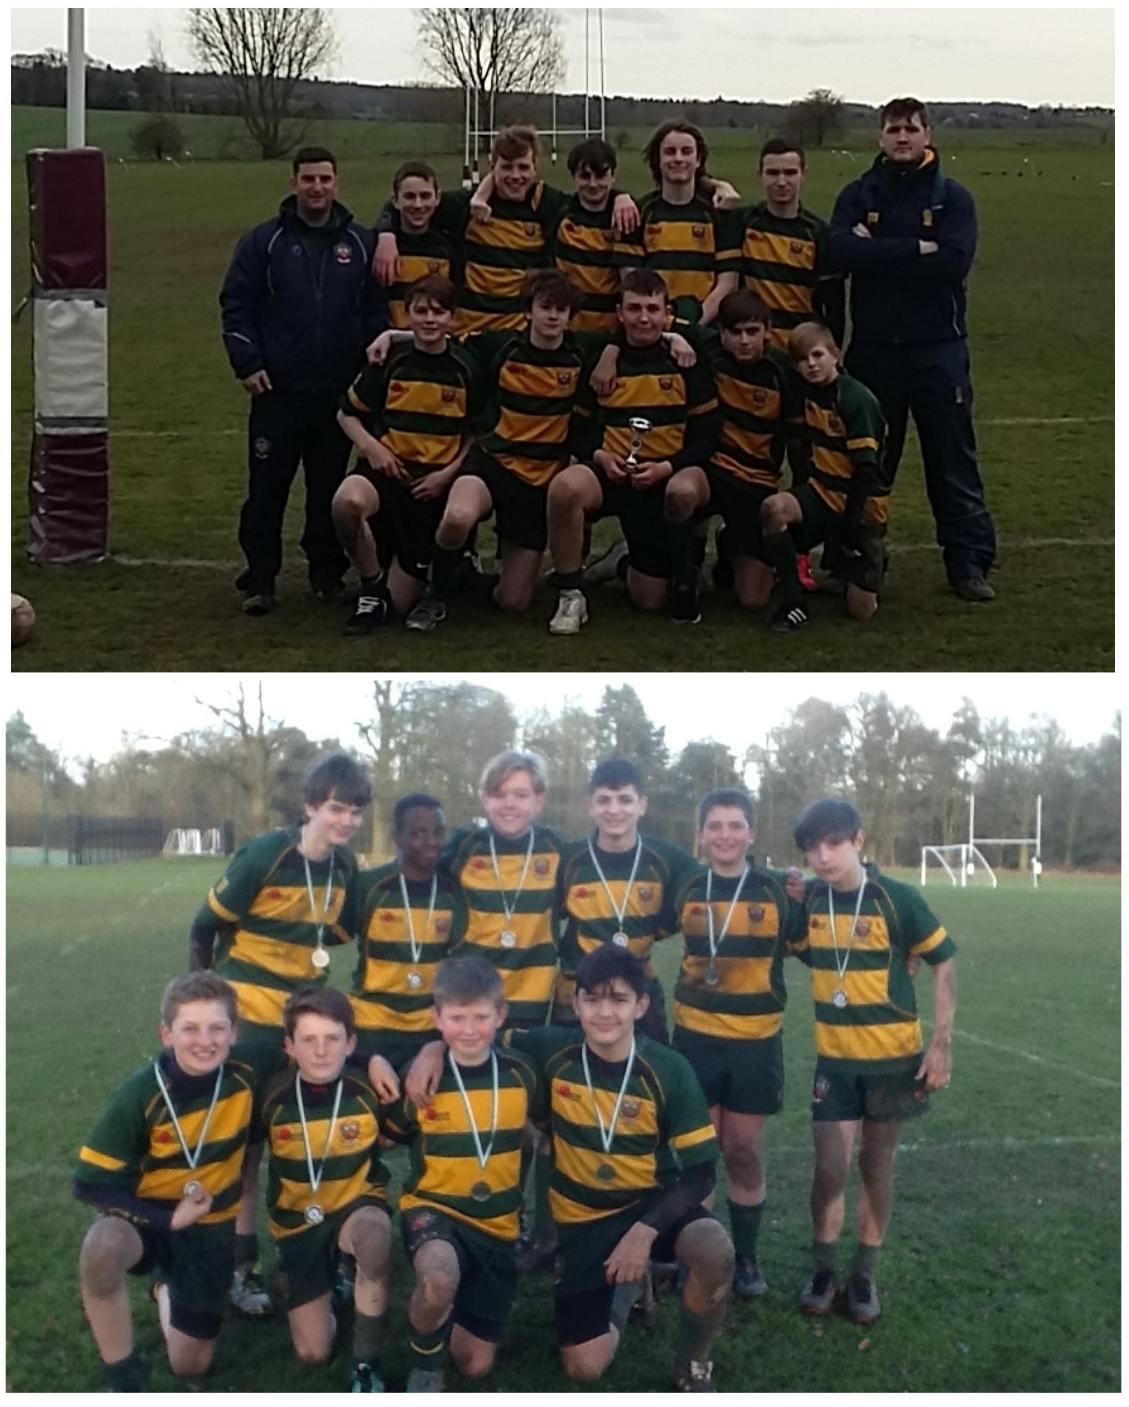 team lines ups of cheadle hulme school's u14 and u13 rugby 7s sevens teams after playing at terra nova and adams grammar school tournaments